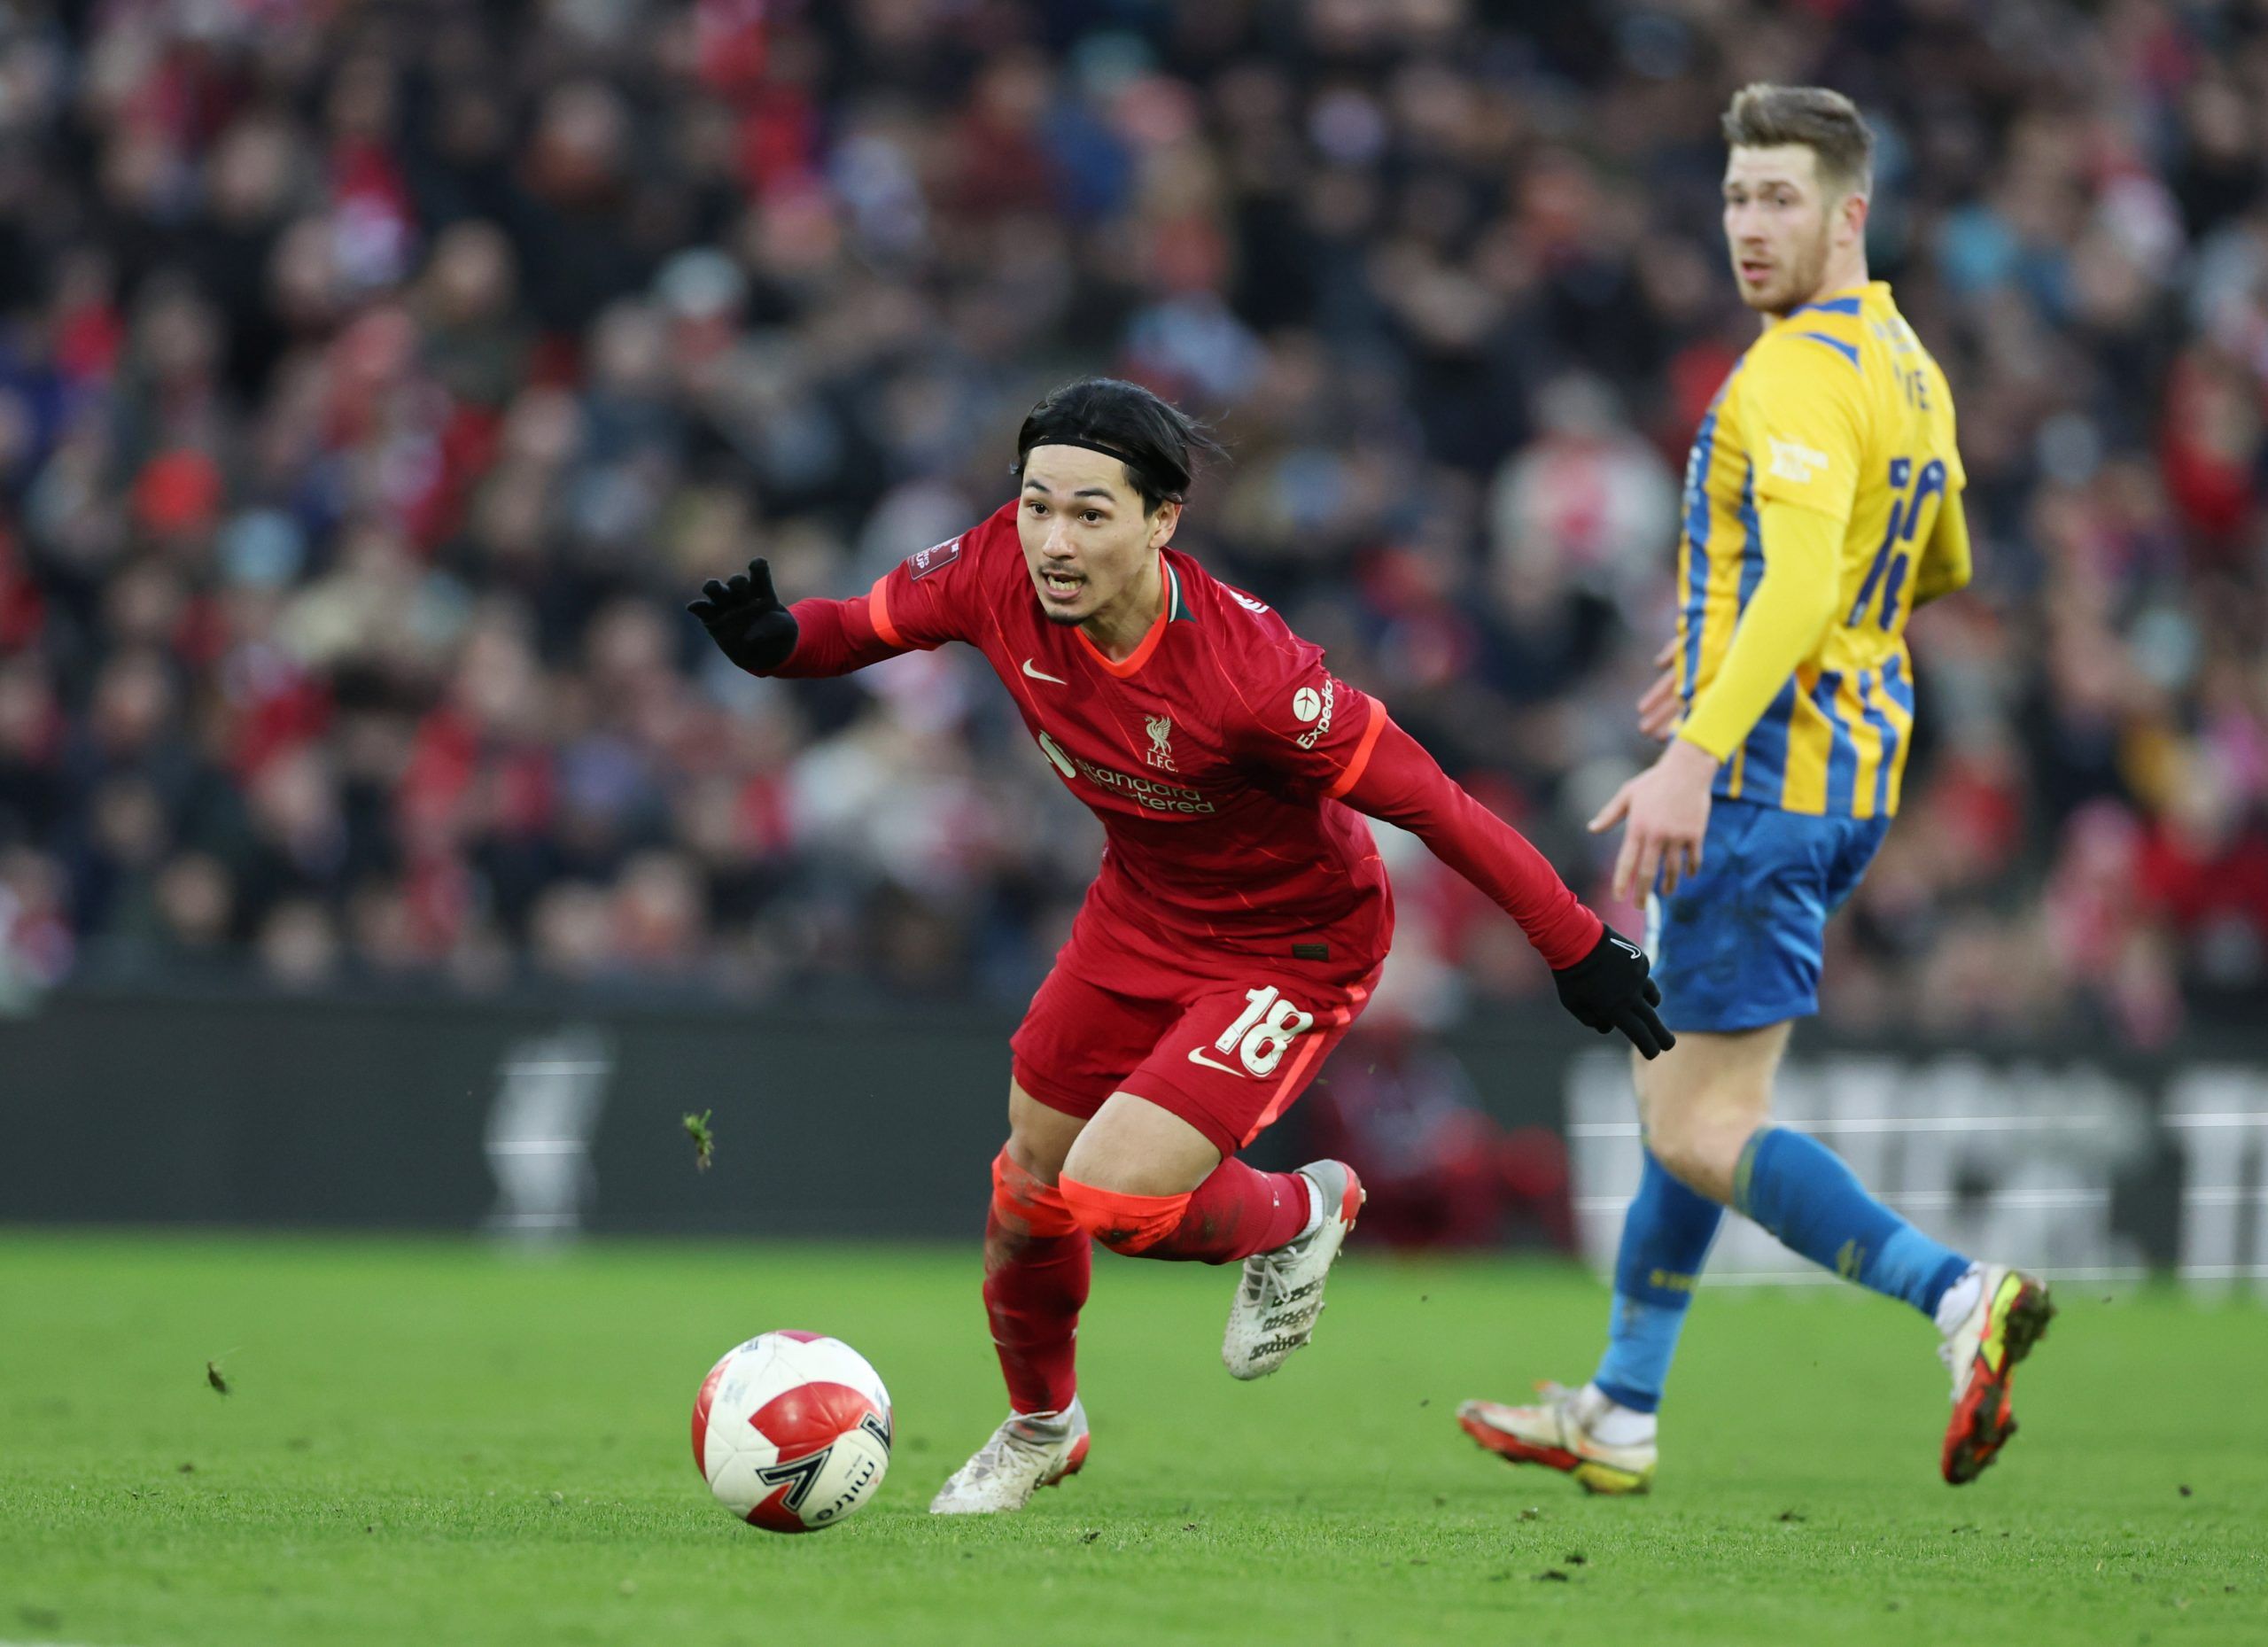 Soccer Football - FA Cup Third Round - Liverpool v Shrewsbury Town - Anfield, Liverpool, Britain - January 9, 2022 Liverpool's Takumi Minamino in action REUTERS/Phil Noble